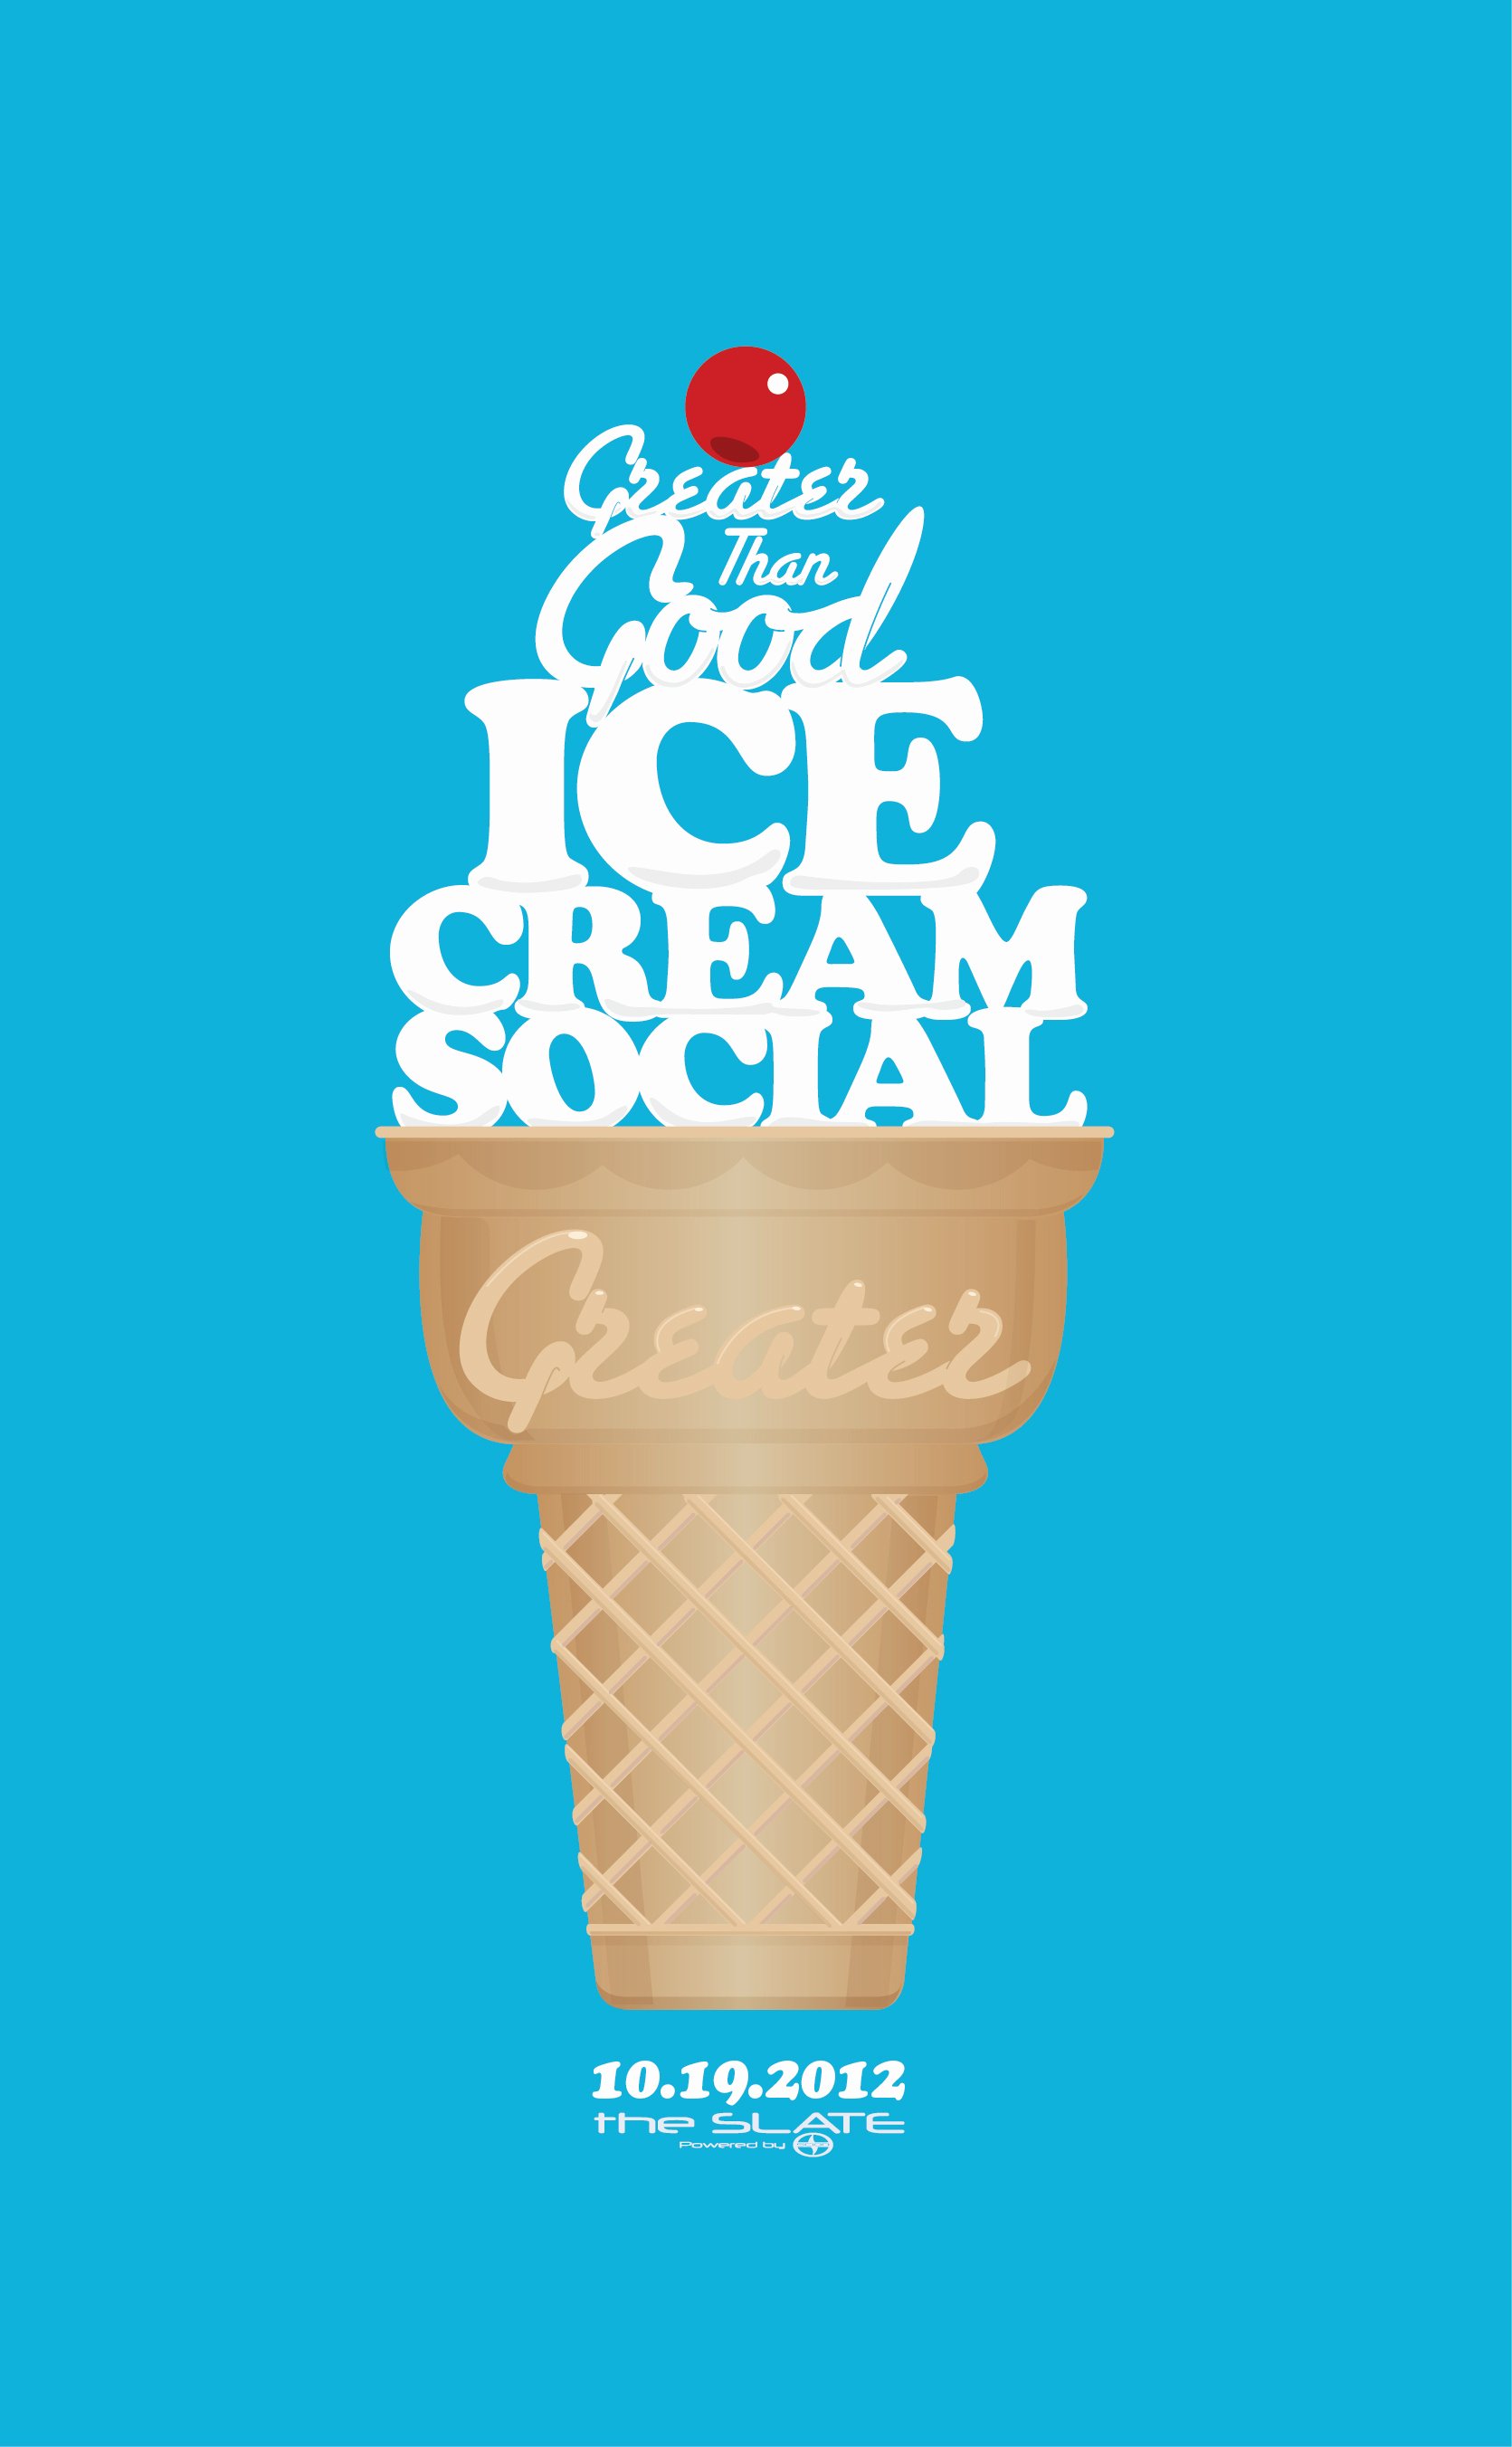 Ice Cream social Flyer Template Free New 301 Moved Permanently